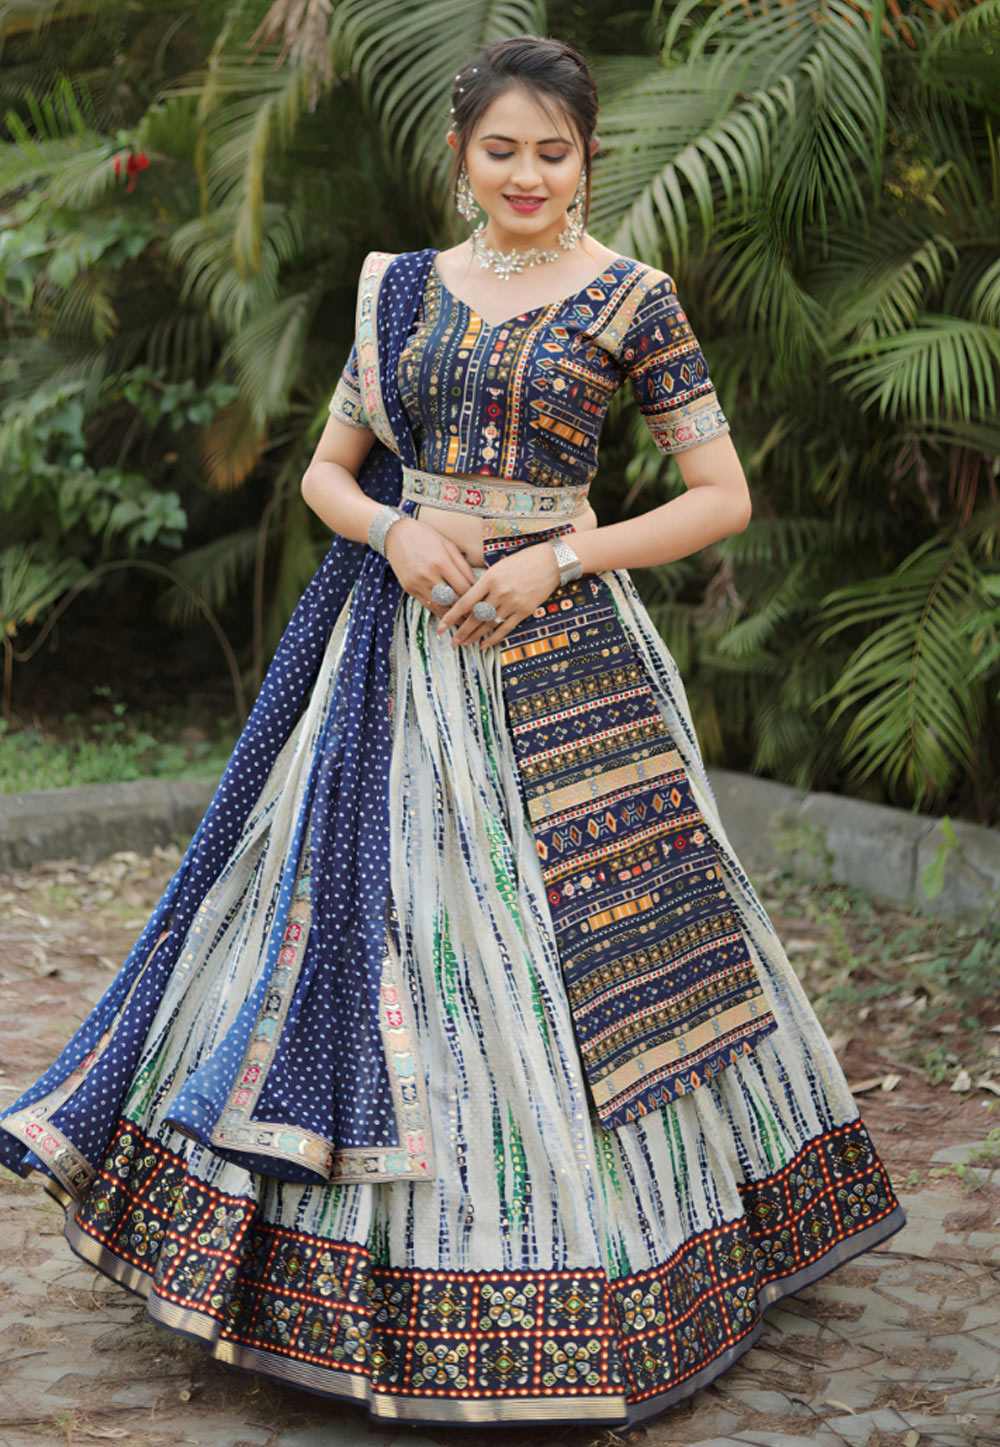 Add These 8 Ghagra Choli Images to Your Pinterest Board ASAP